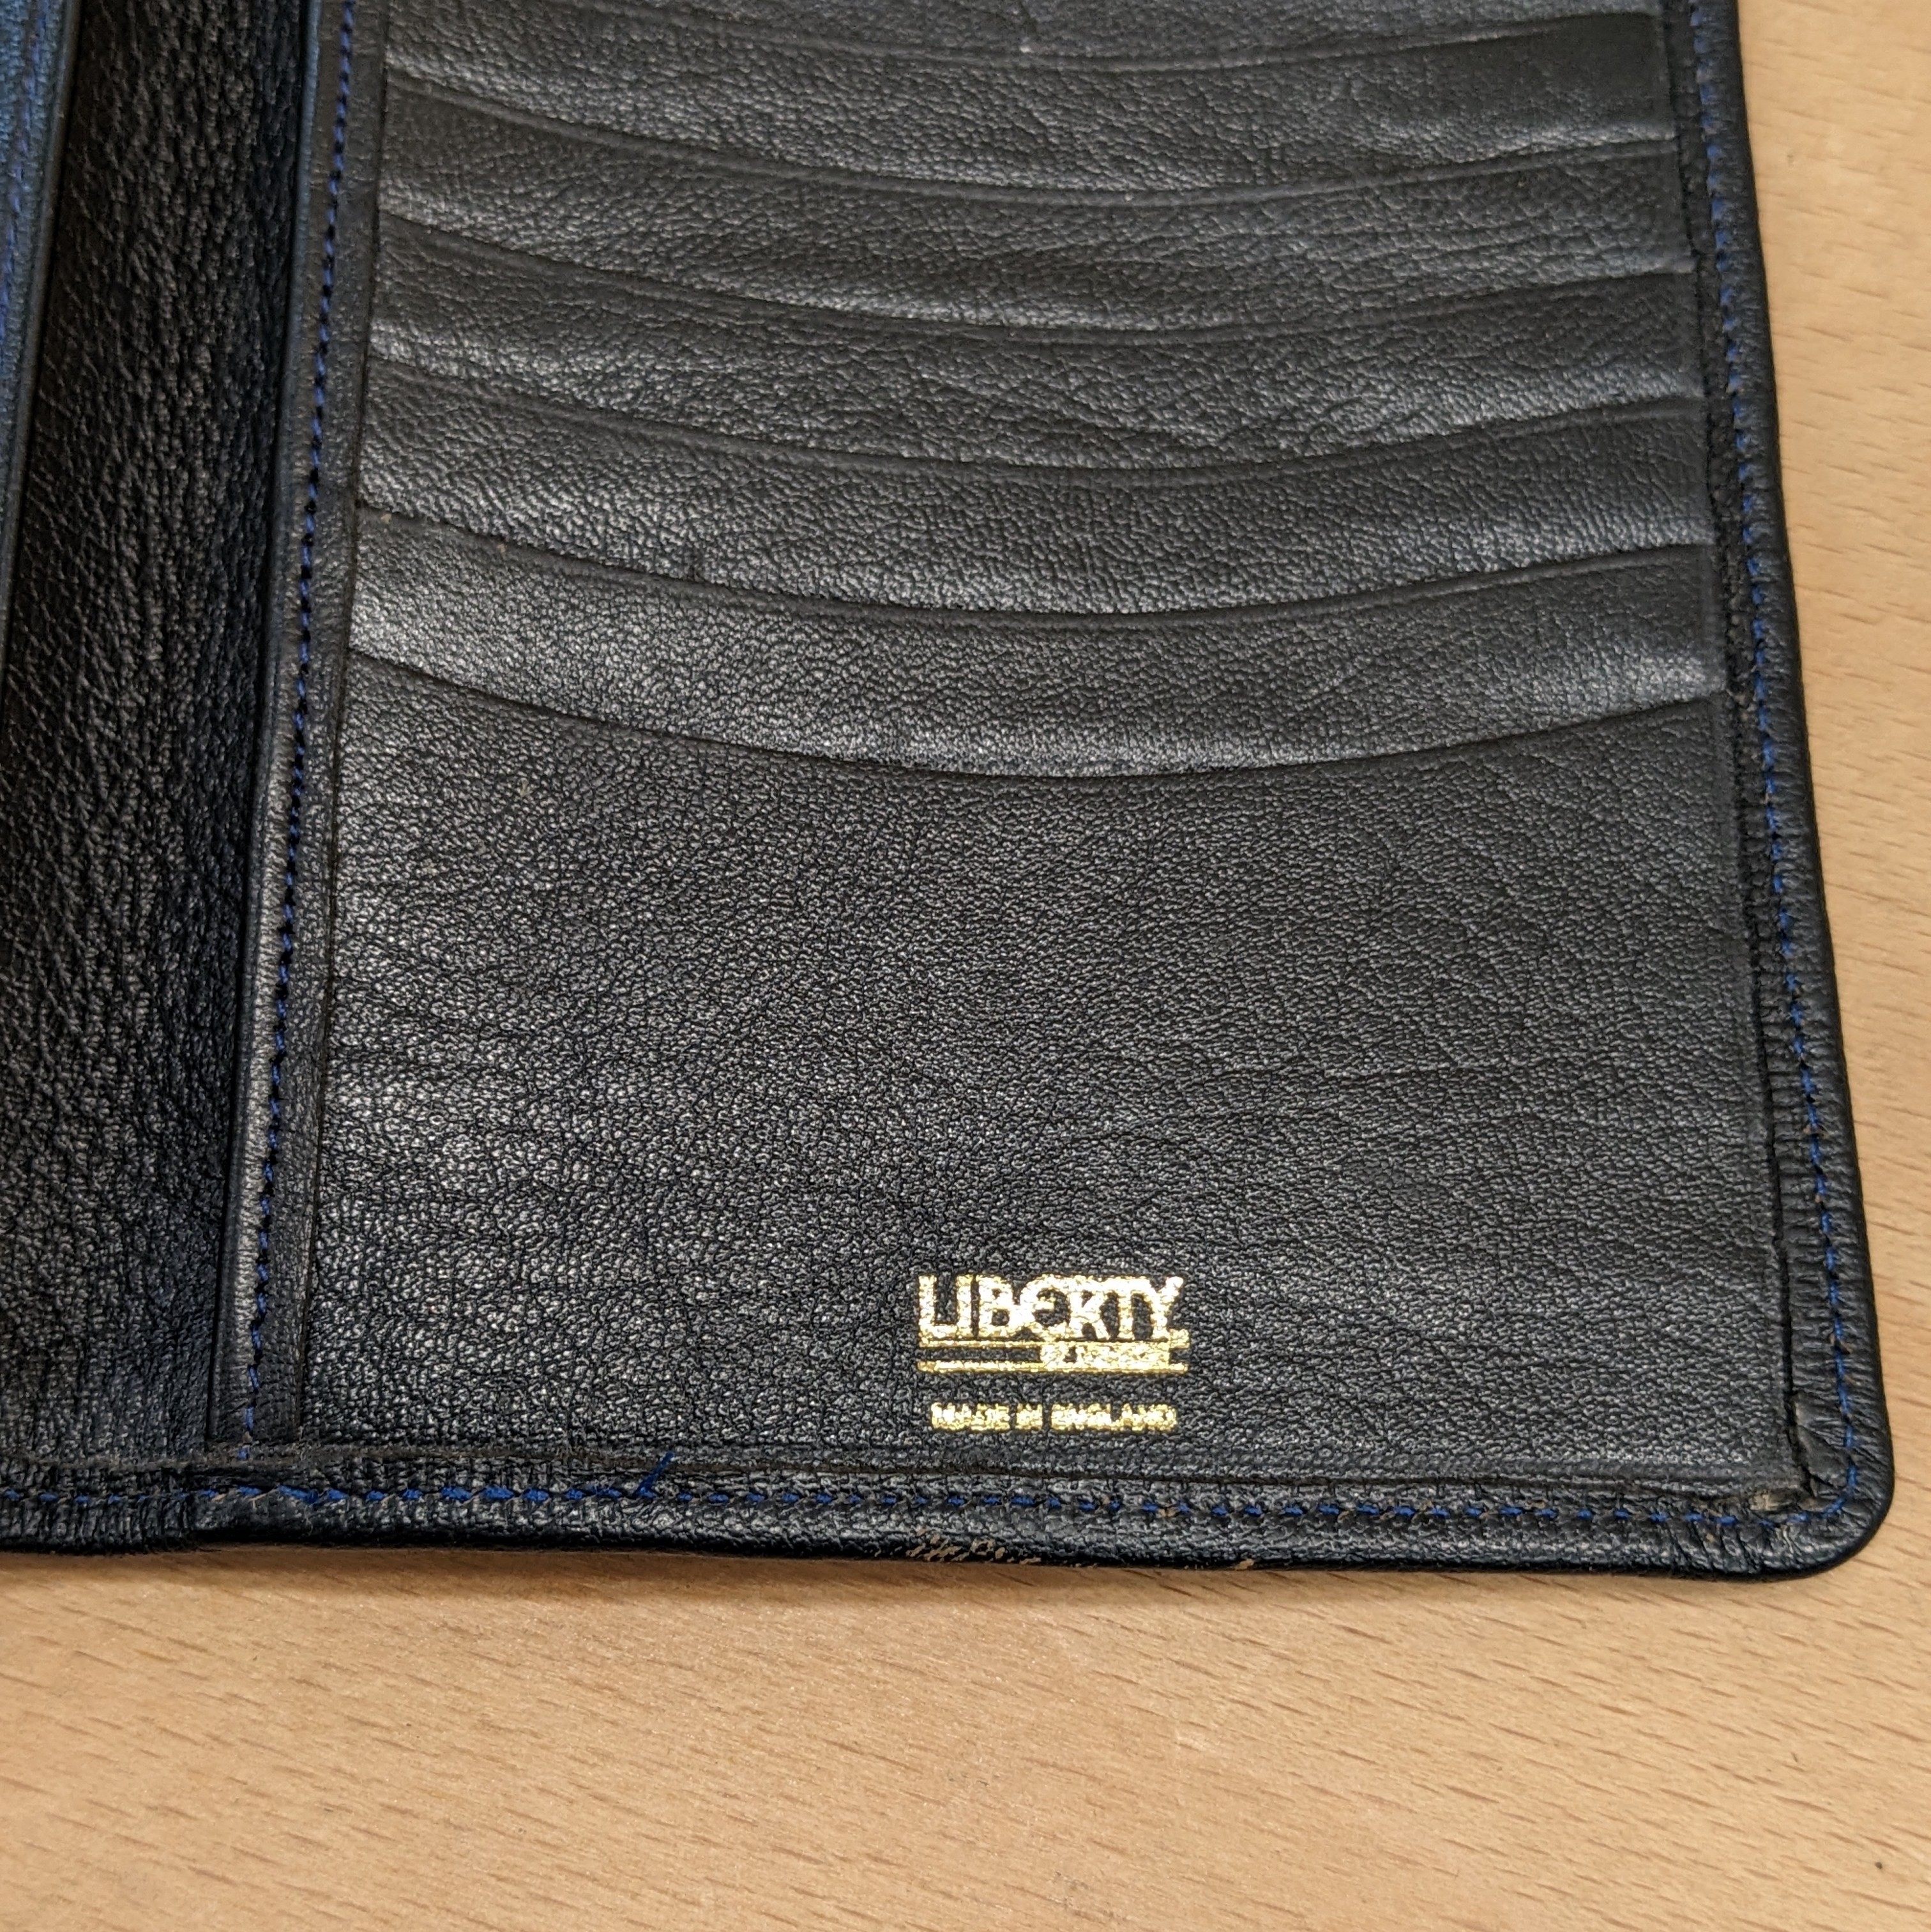 Liberty of London card holder close up view of brand logo inside holder